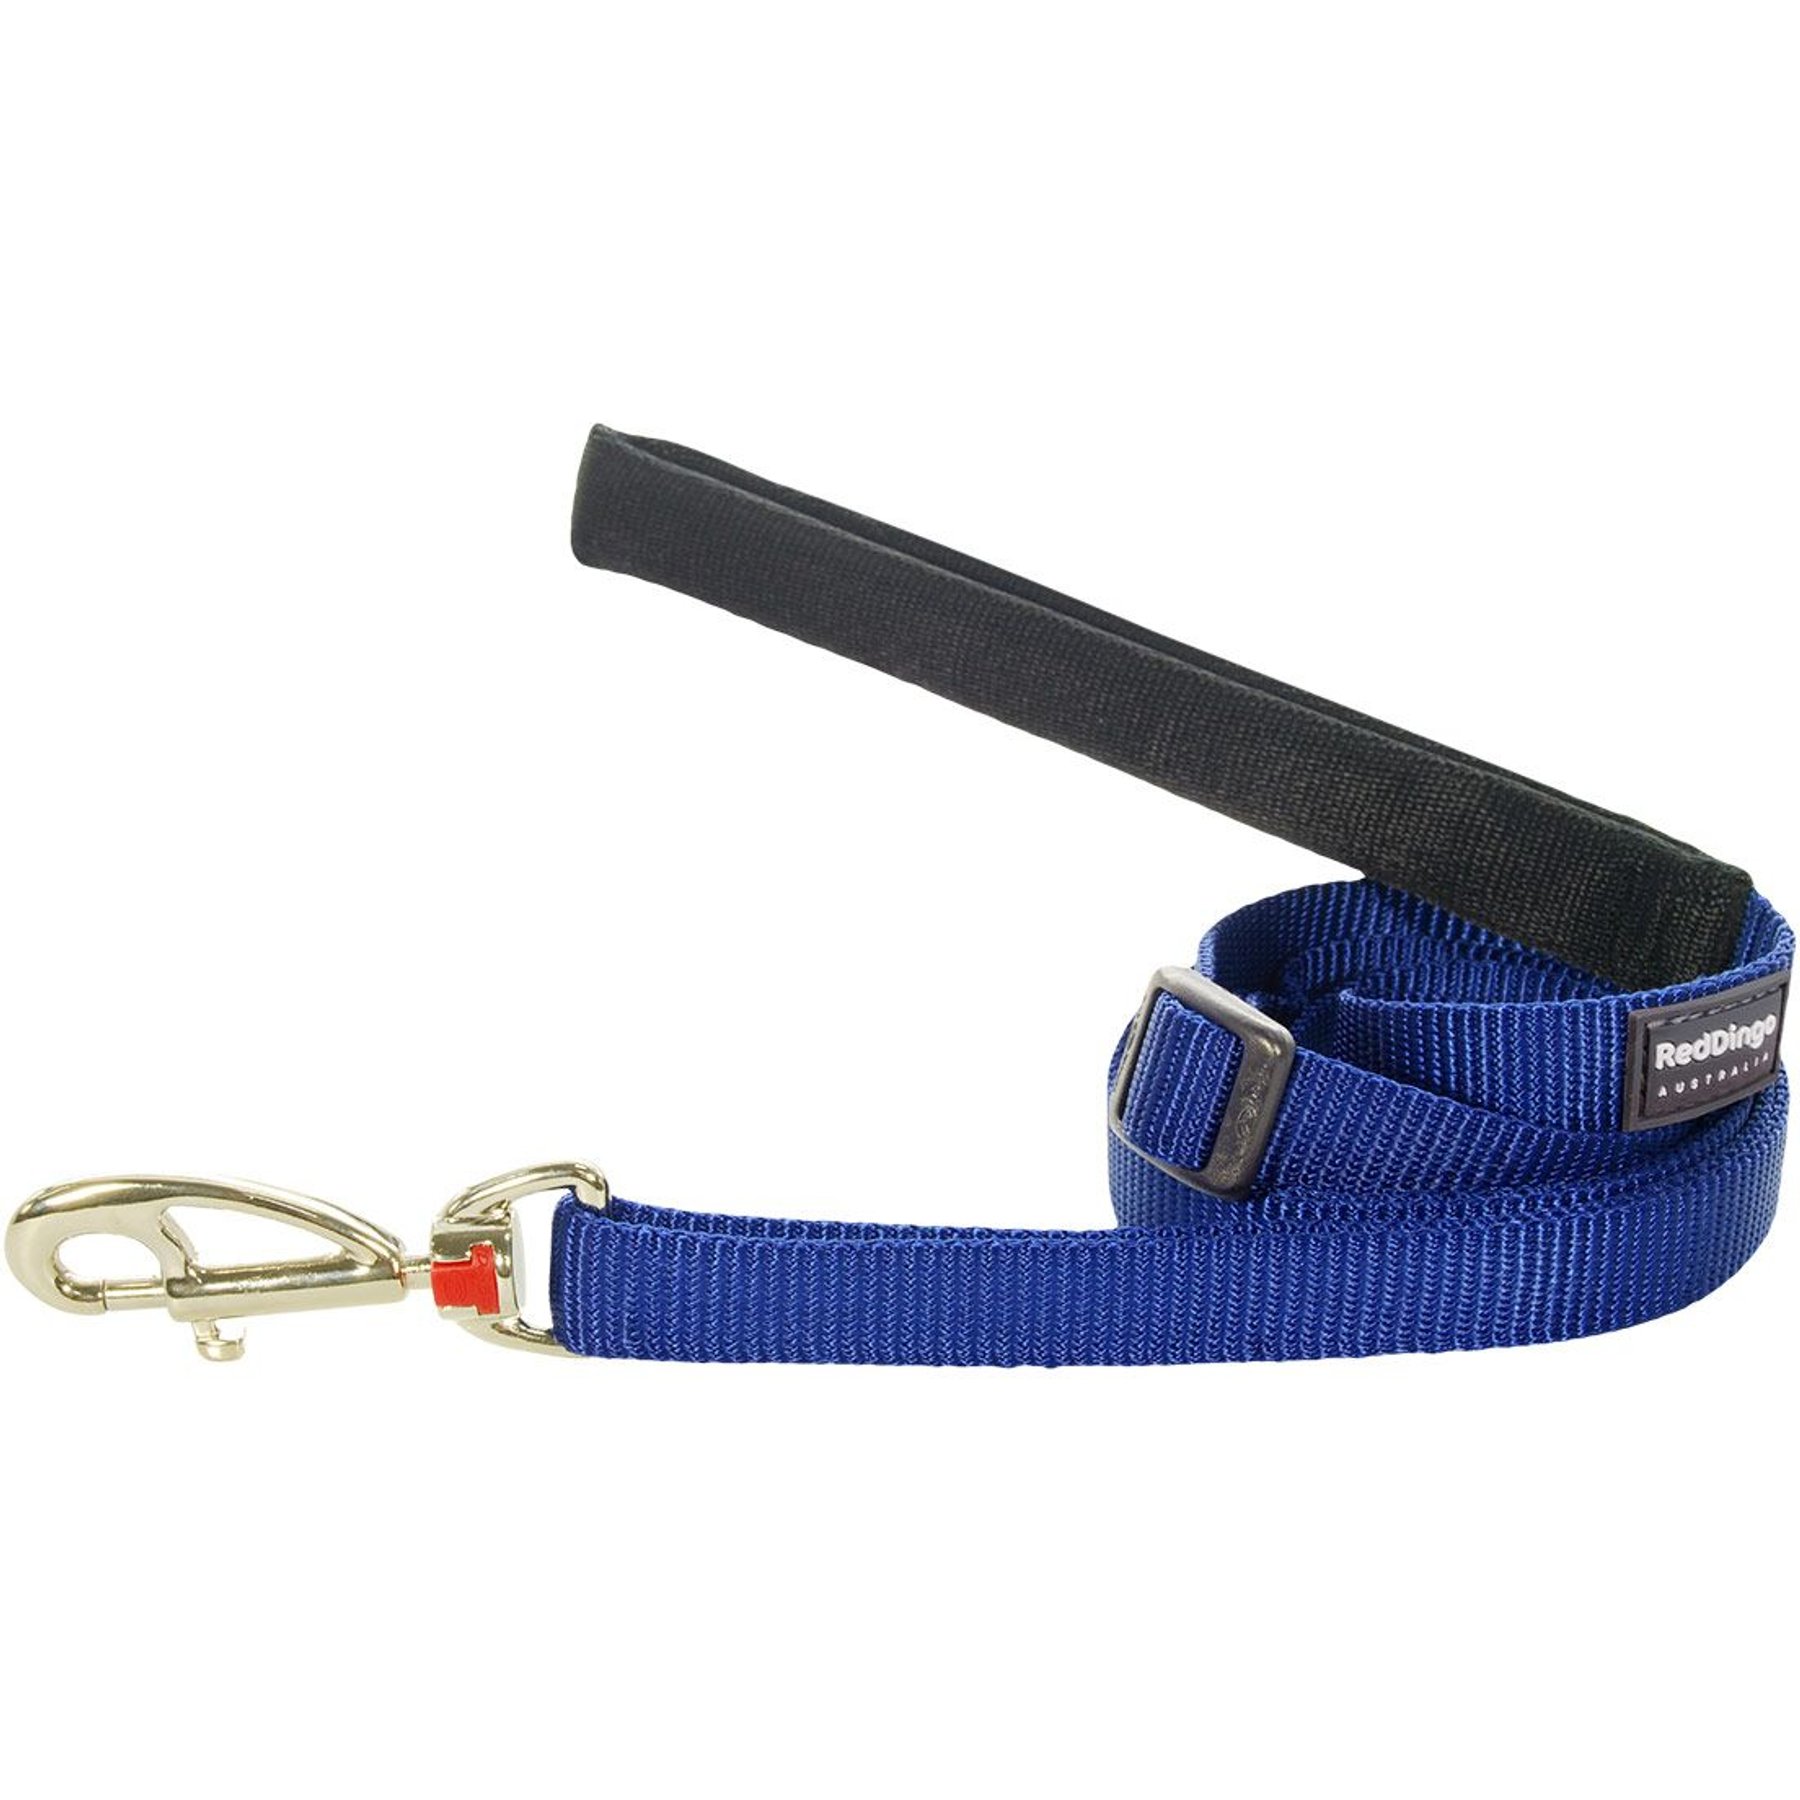 RED DINGO Classic Nylon Dog Leash, Blue, Large: 6-ft long, 1-in wide ...